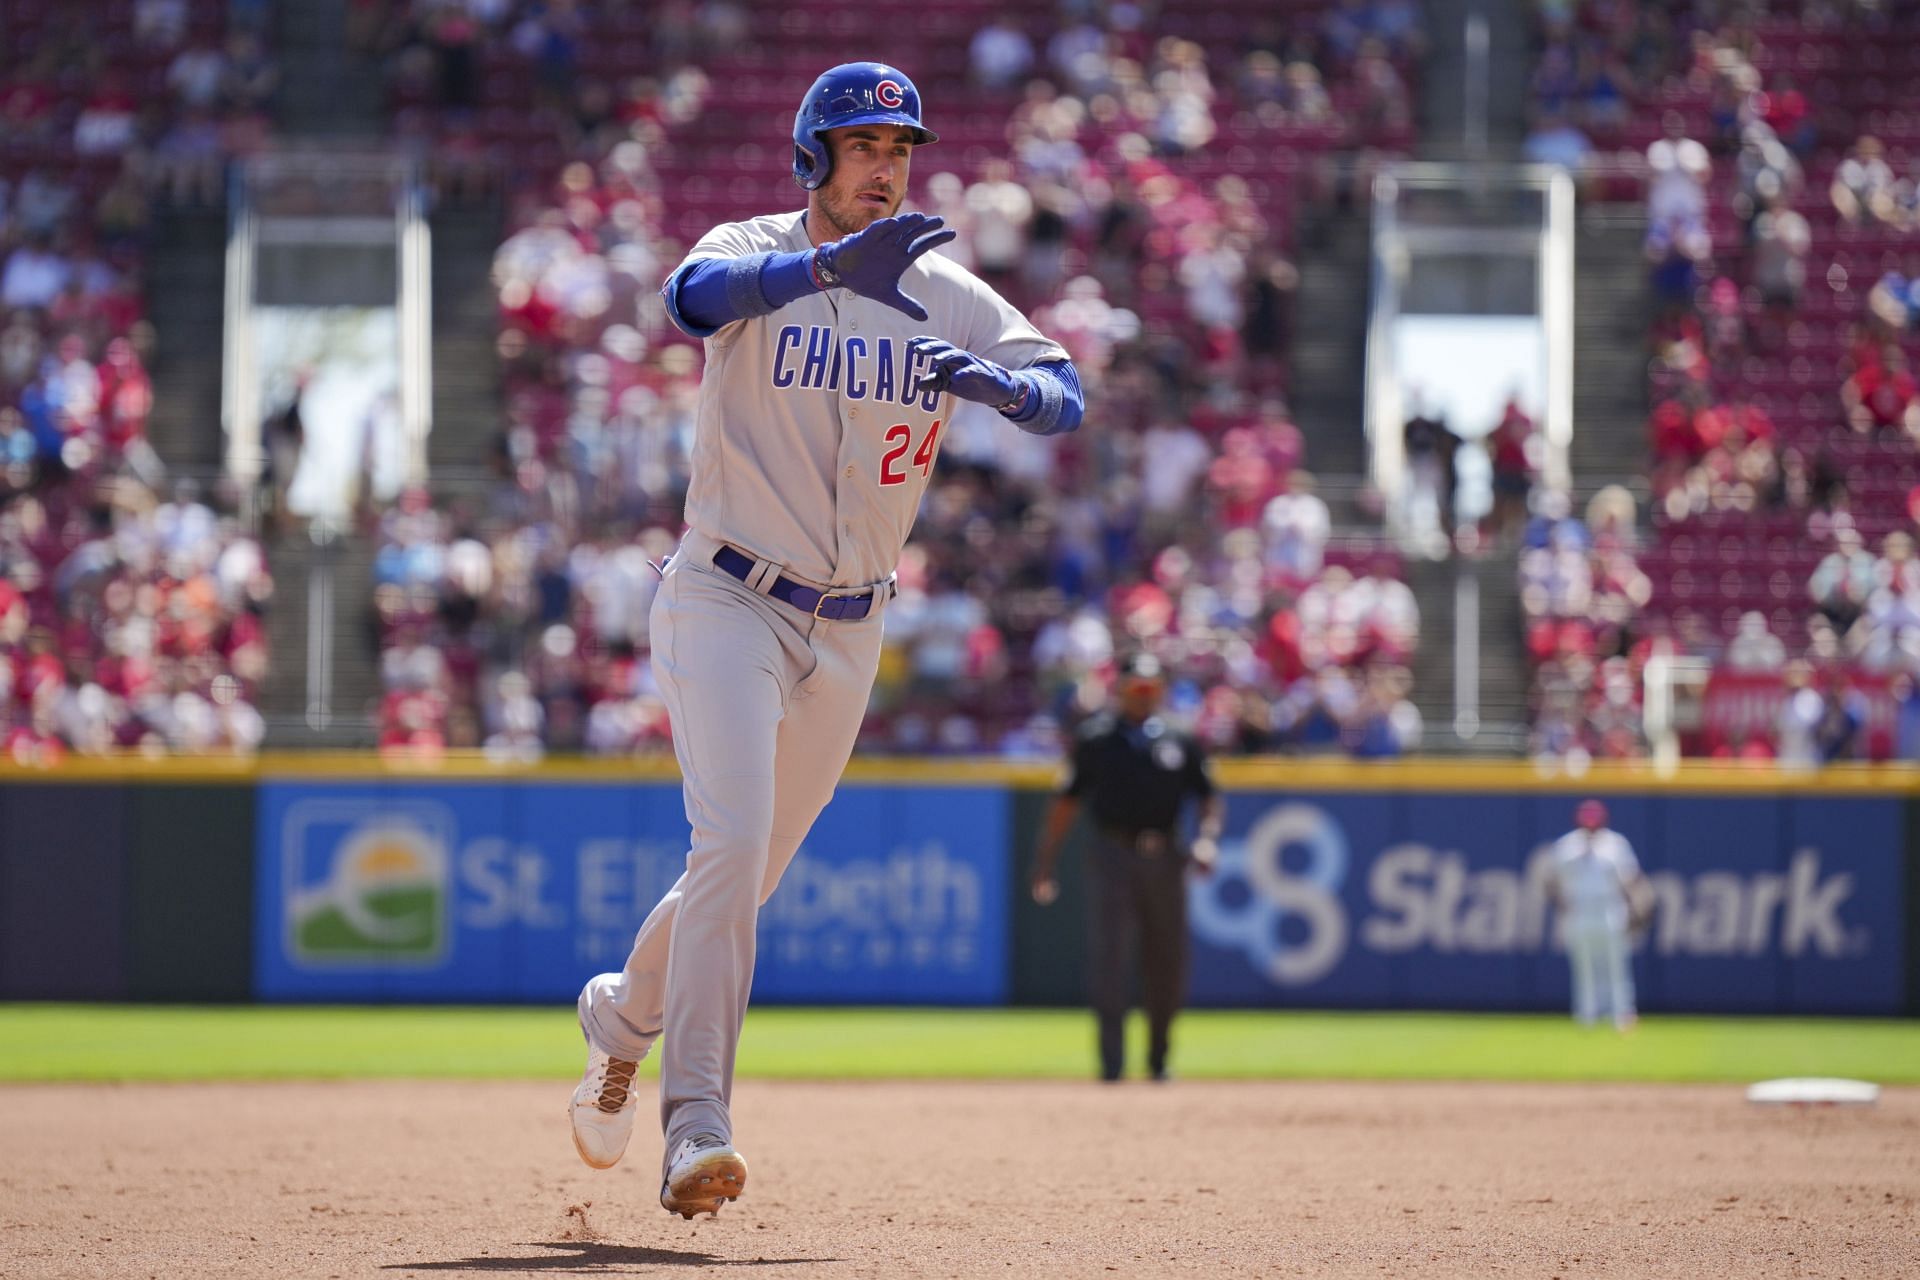 Cody Bellinger is going to get paid